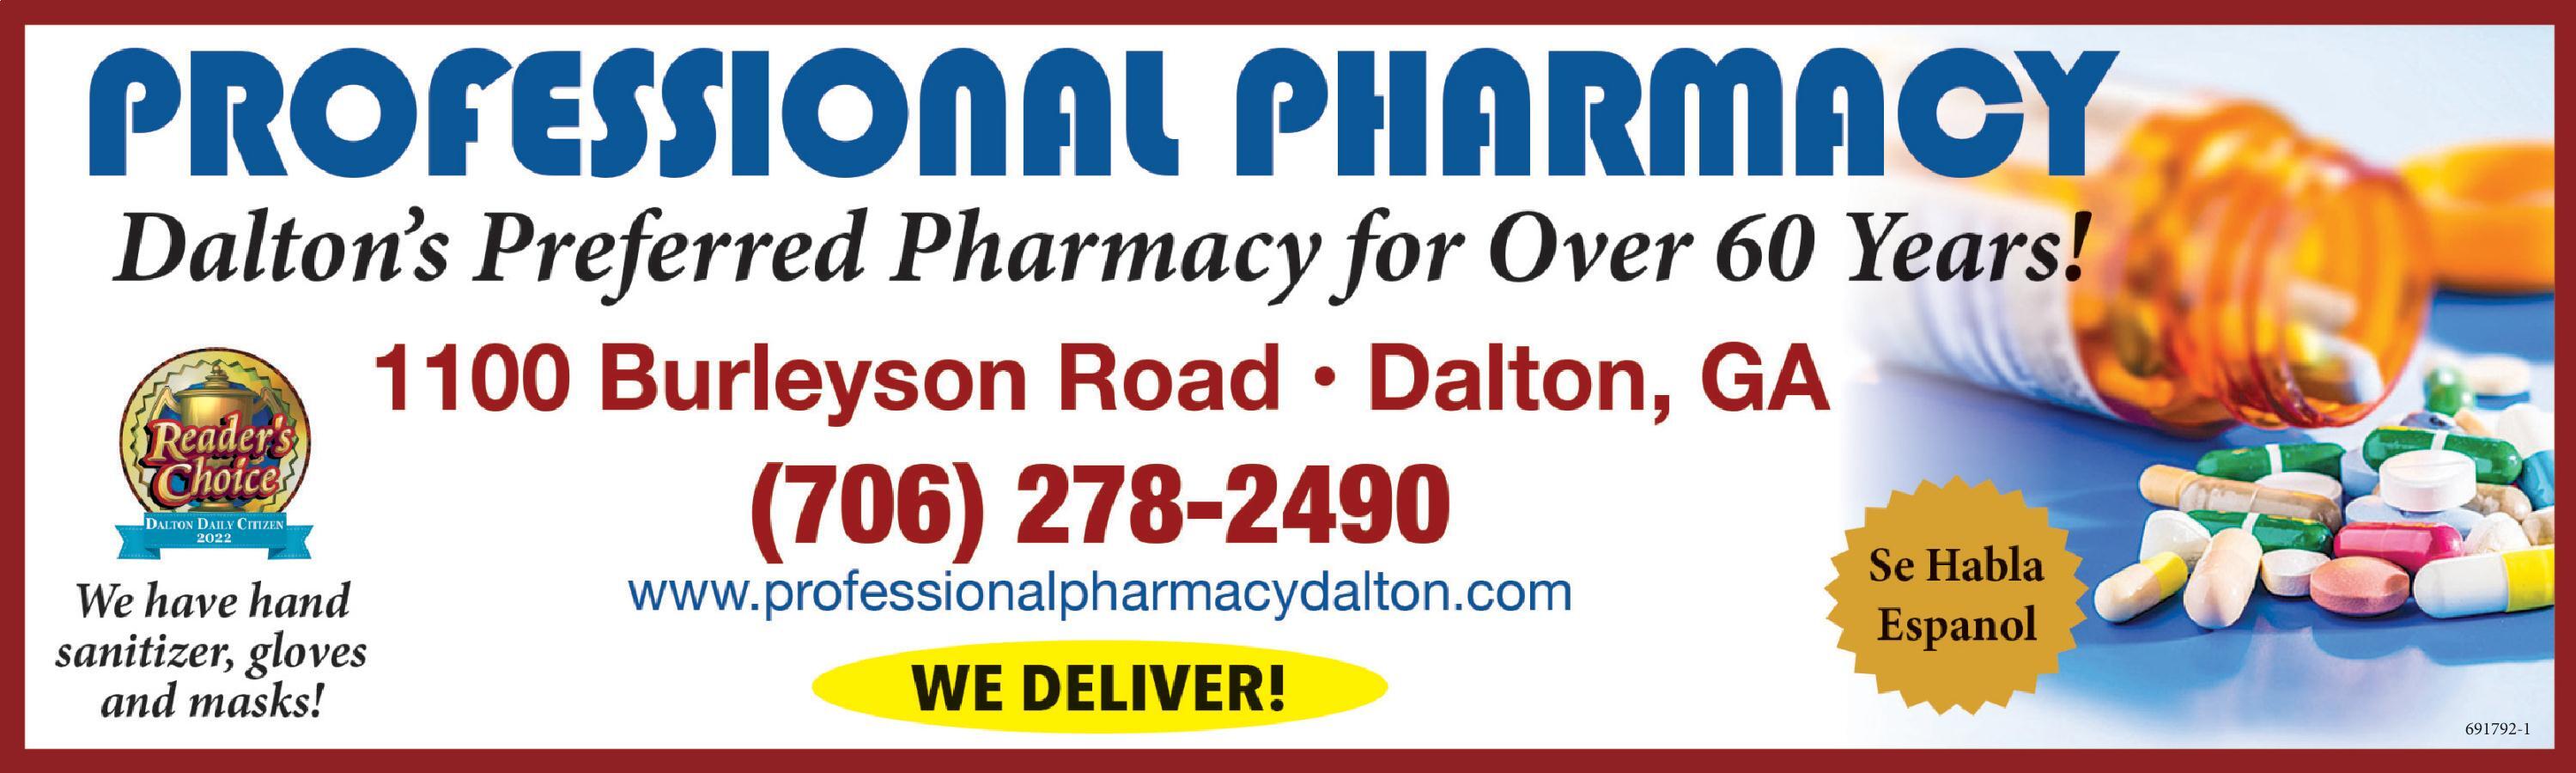 The Daily Citizen | Newspaper Ads | Classifieds | Shopping | Dalton's  Preferred Pharmacy for Over 60 Years!